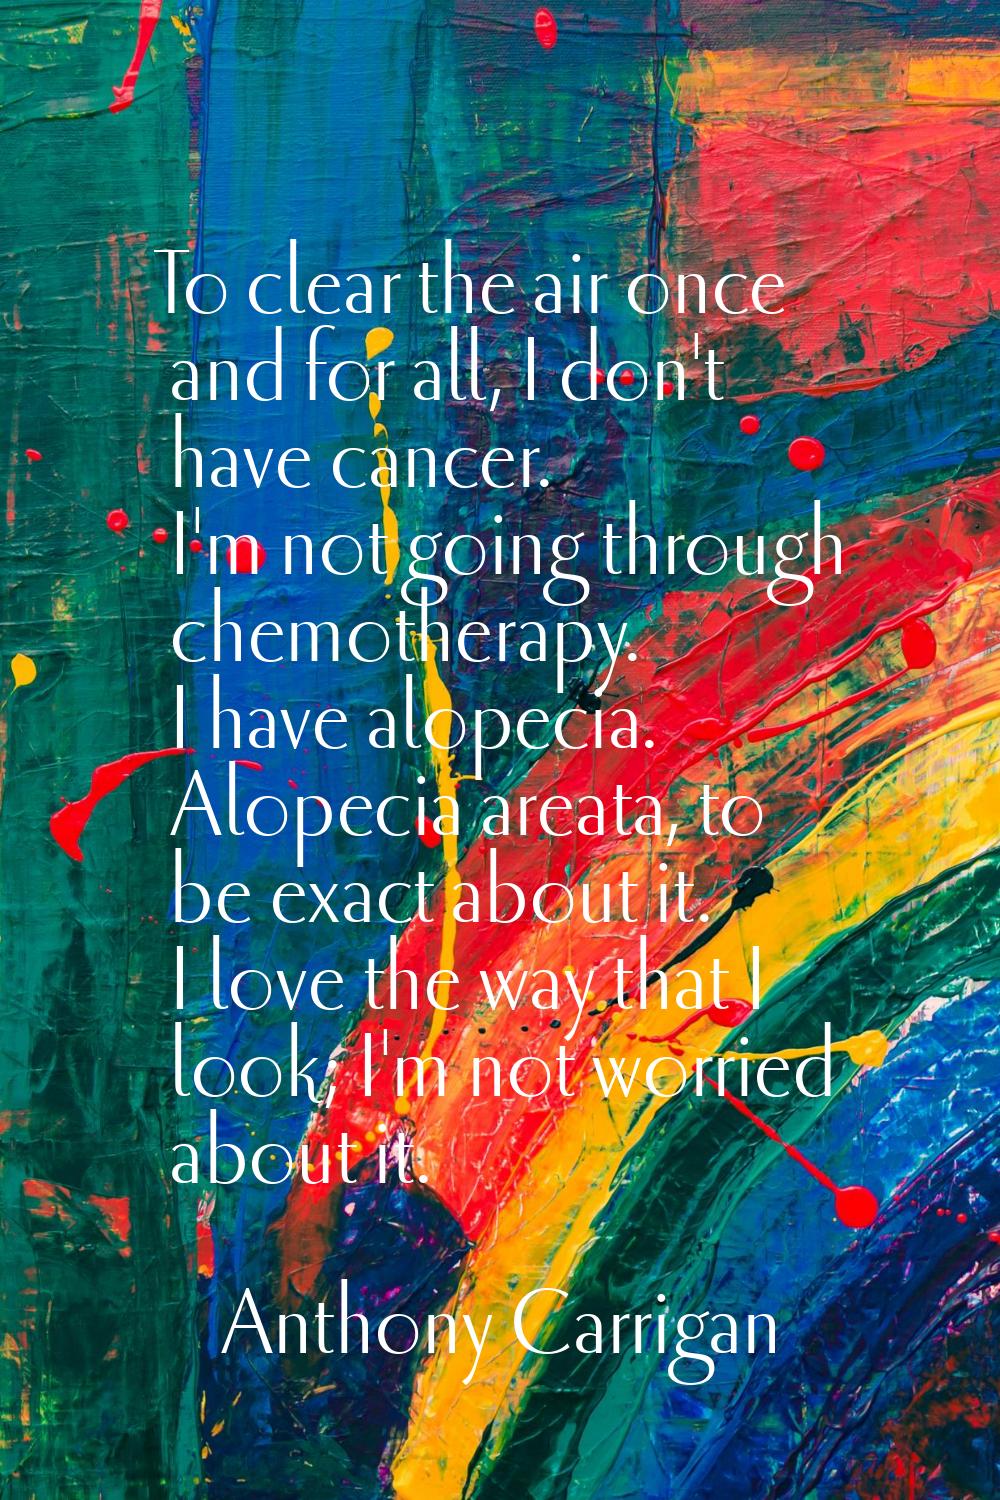 To clear the air once and for all, I don't have cancer. I'm not going through chemotherapy. I have 